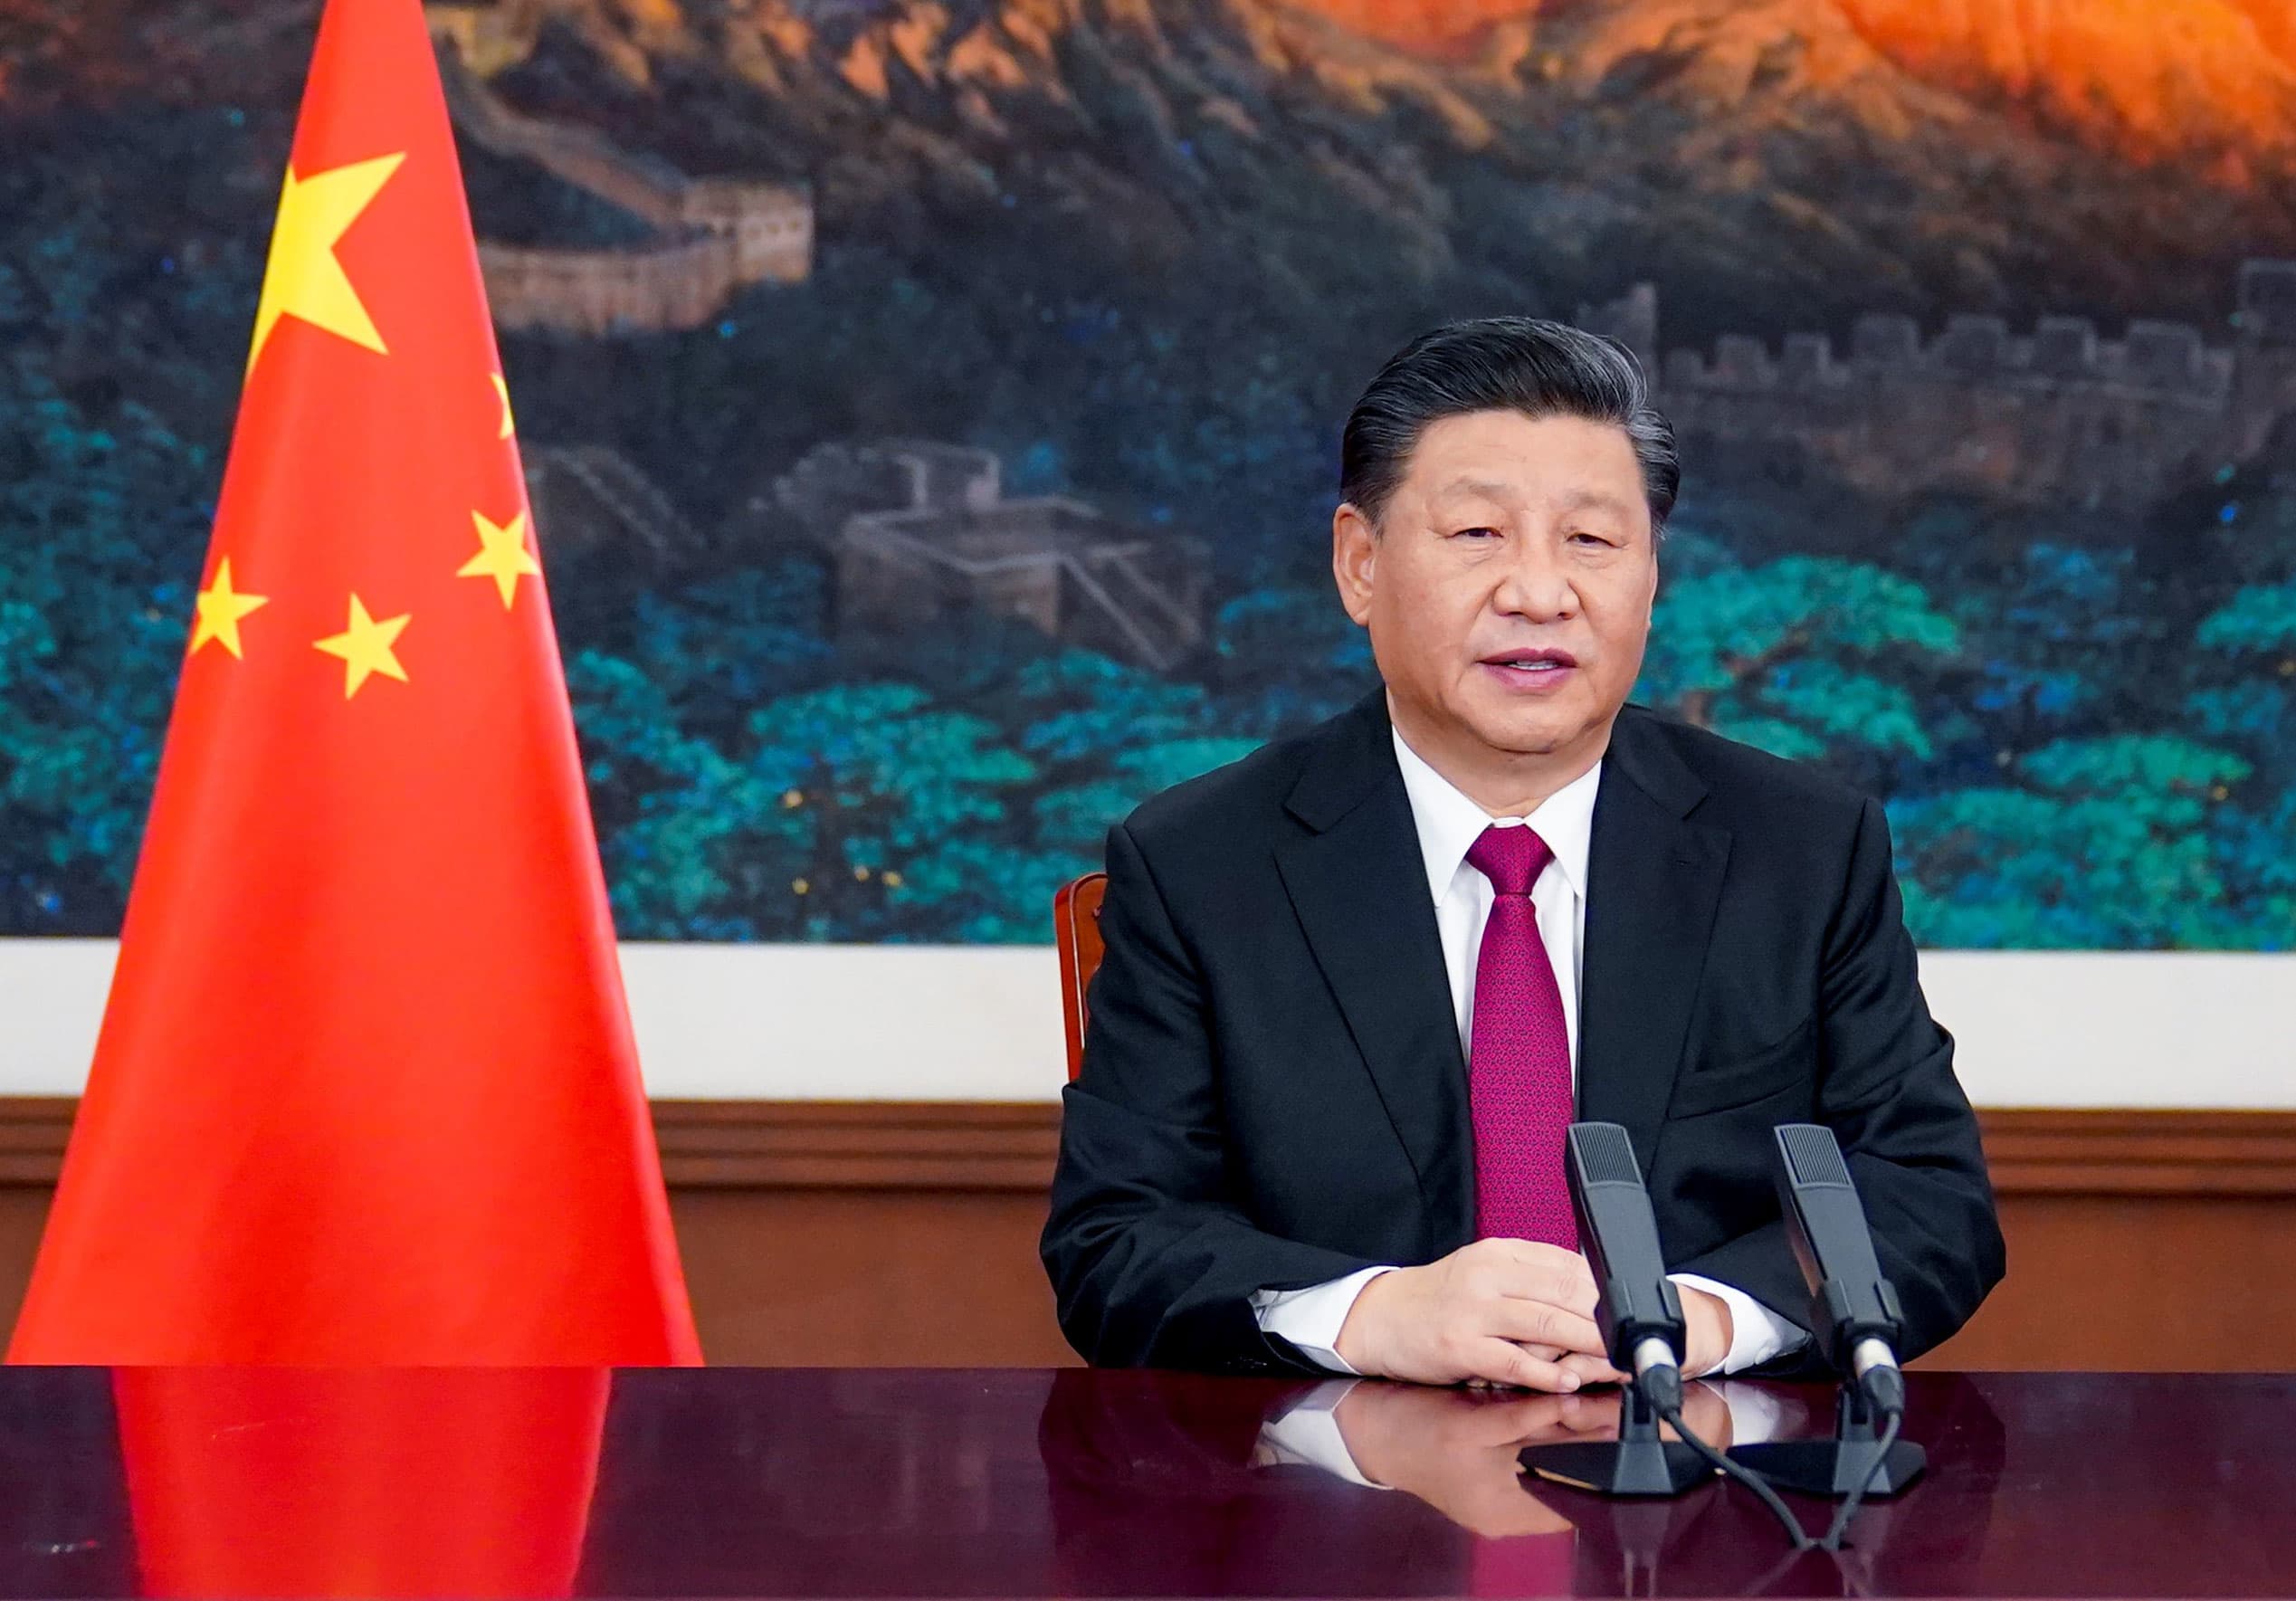 Chinese President Xi Jinping on Globalization, Multilateral Trade